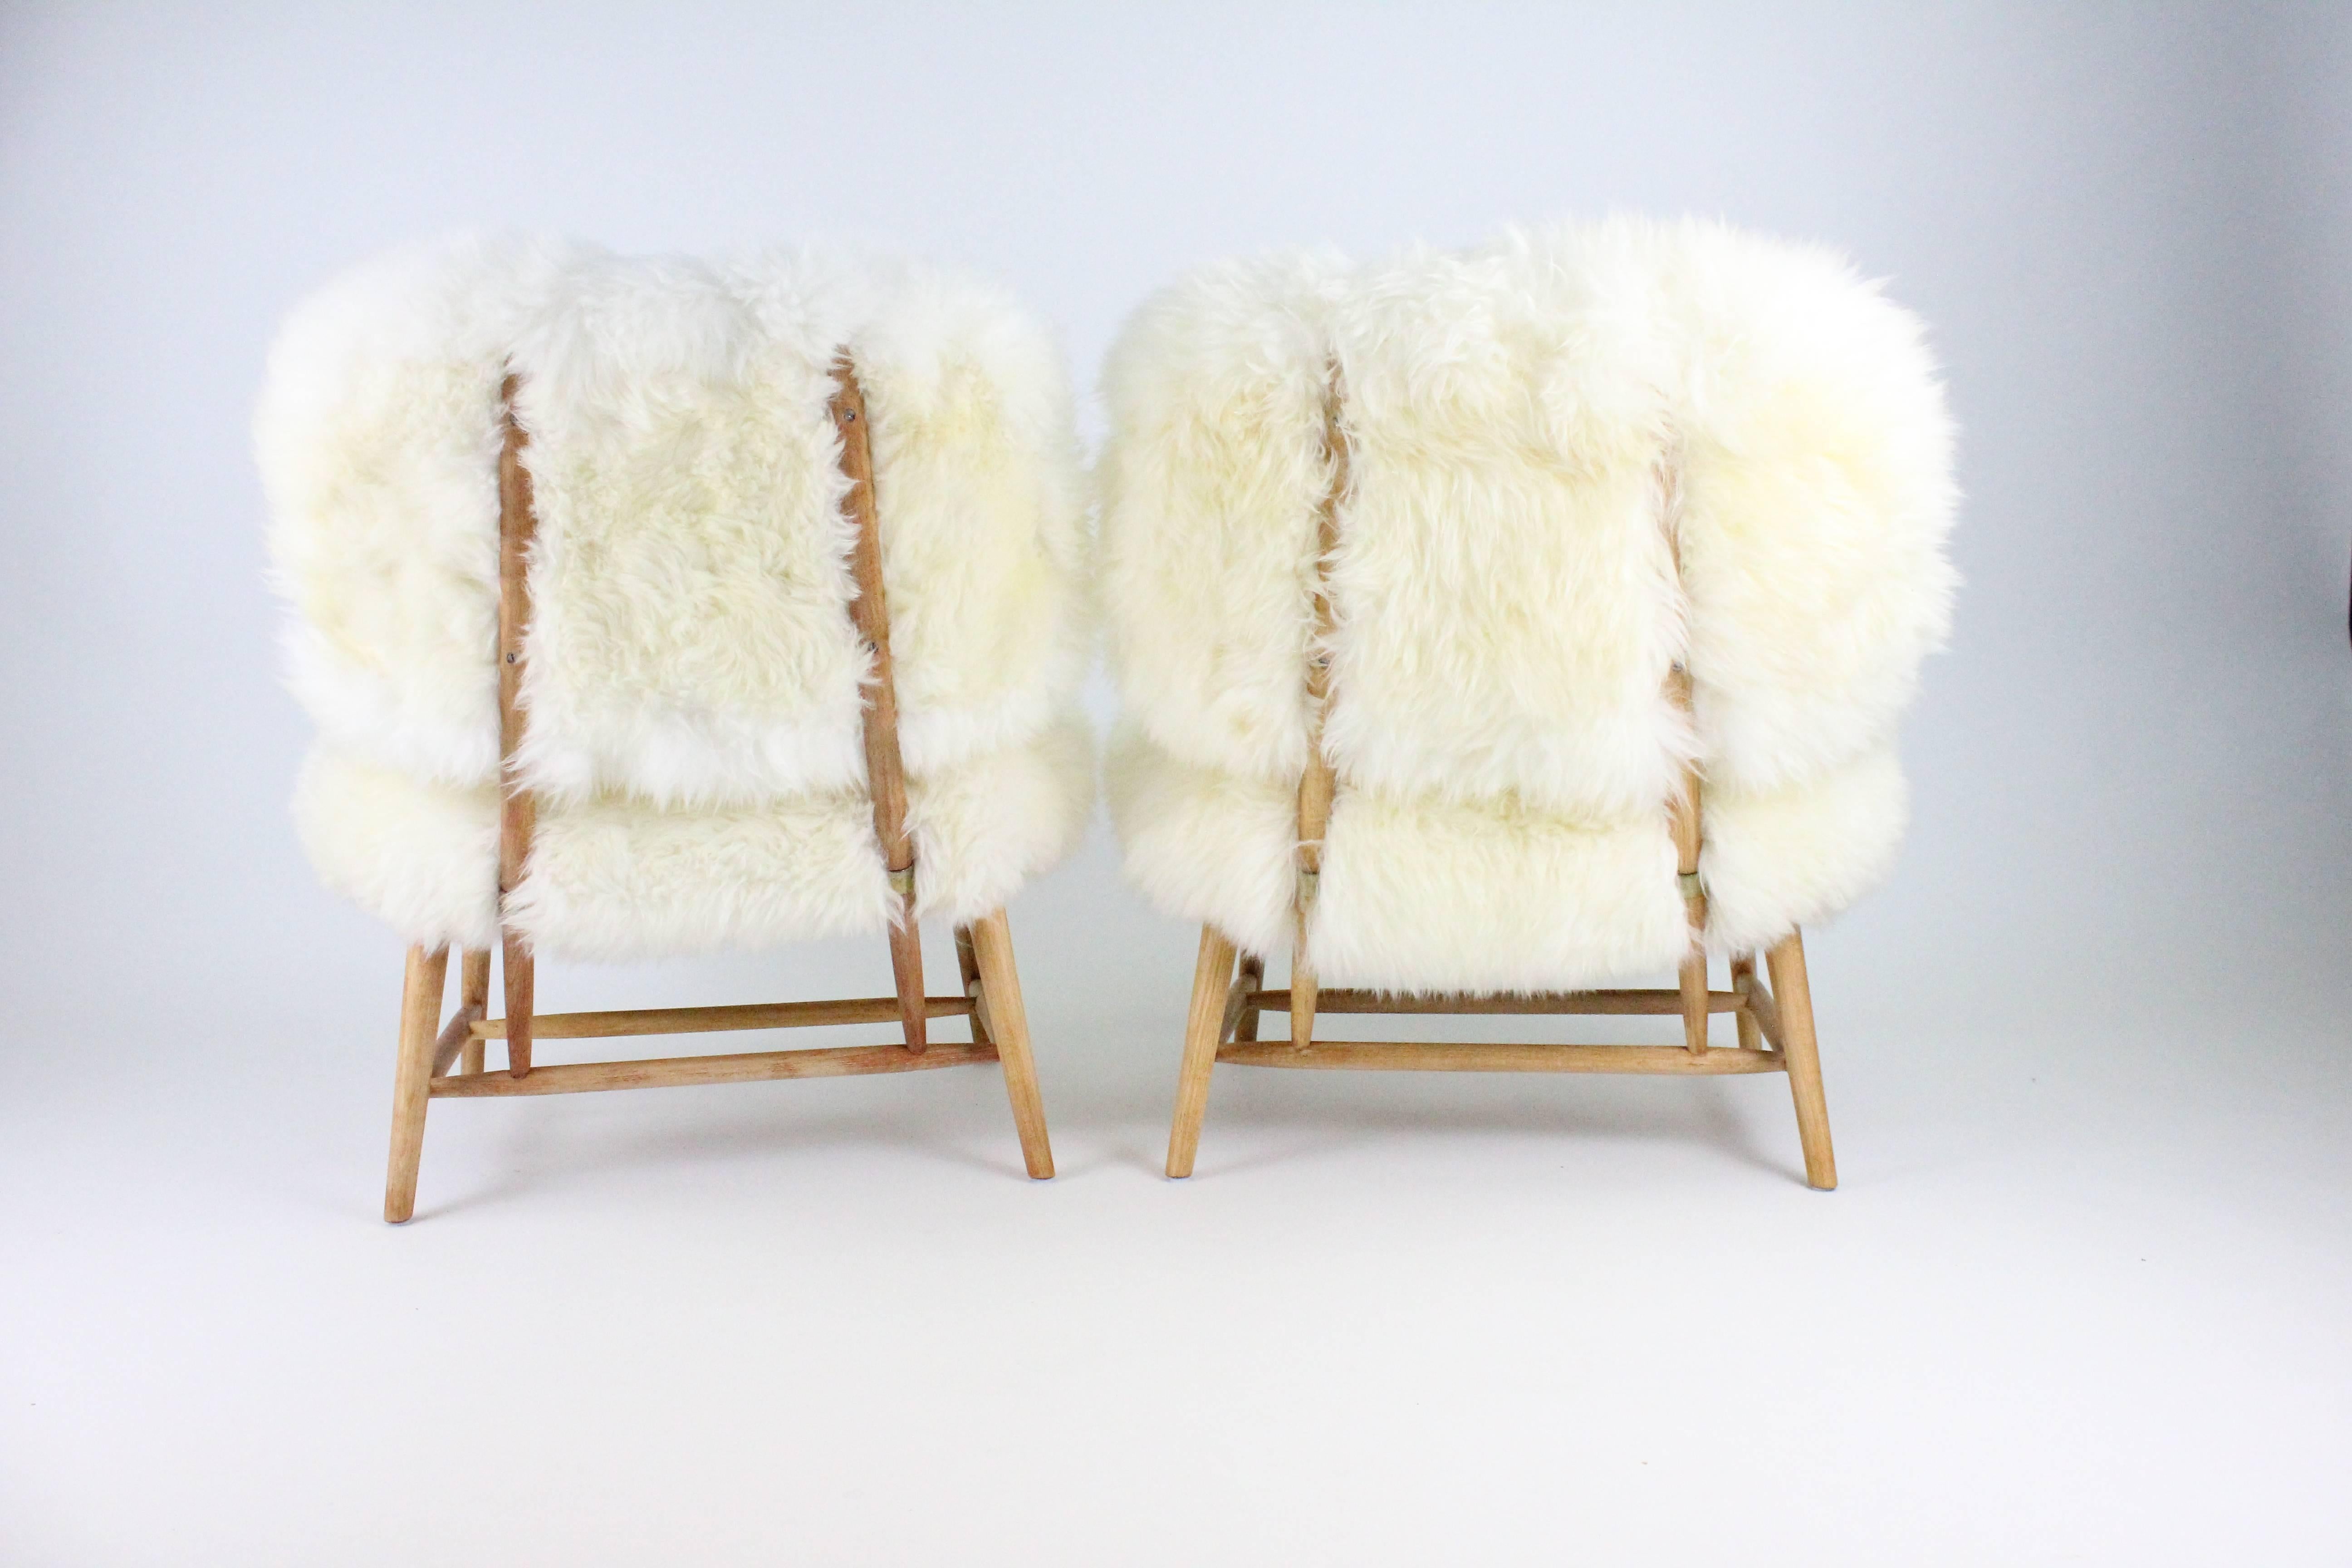 20th Century Pair of Swedish Sheep Skin and Beech Teve Easy Chairs by Alf Svensson for DUX